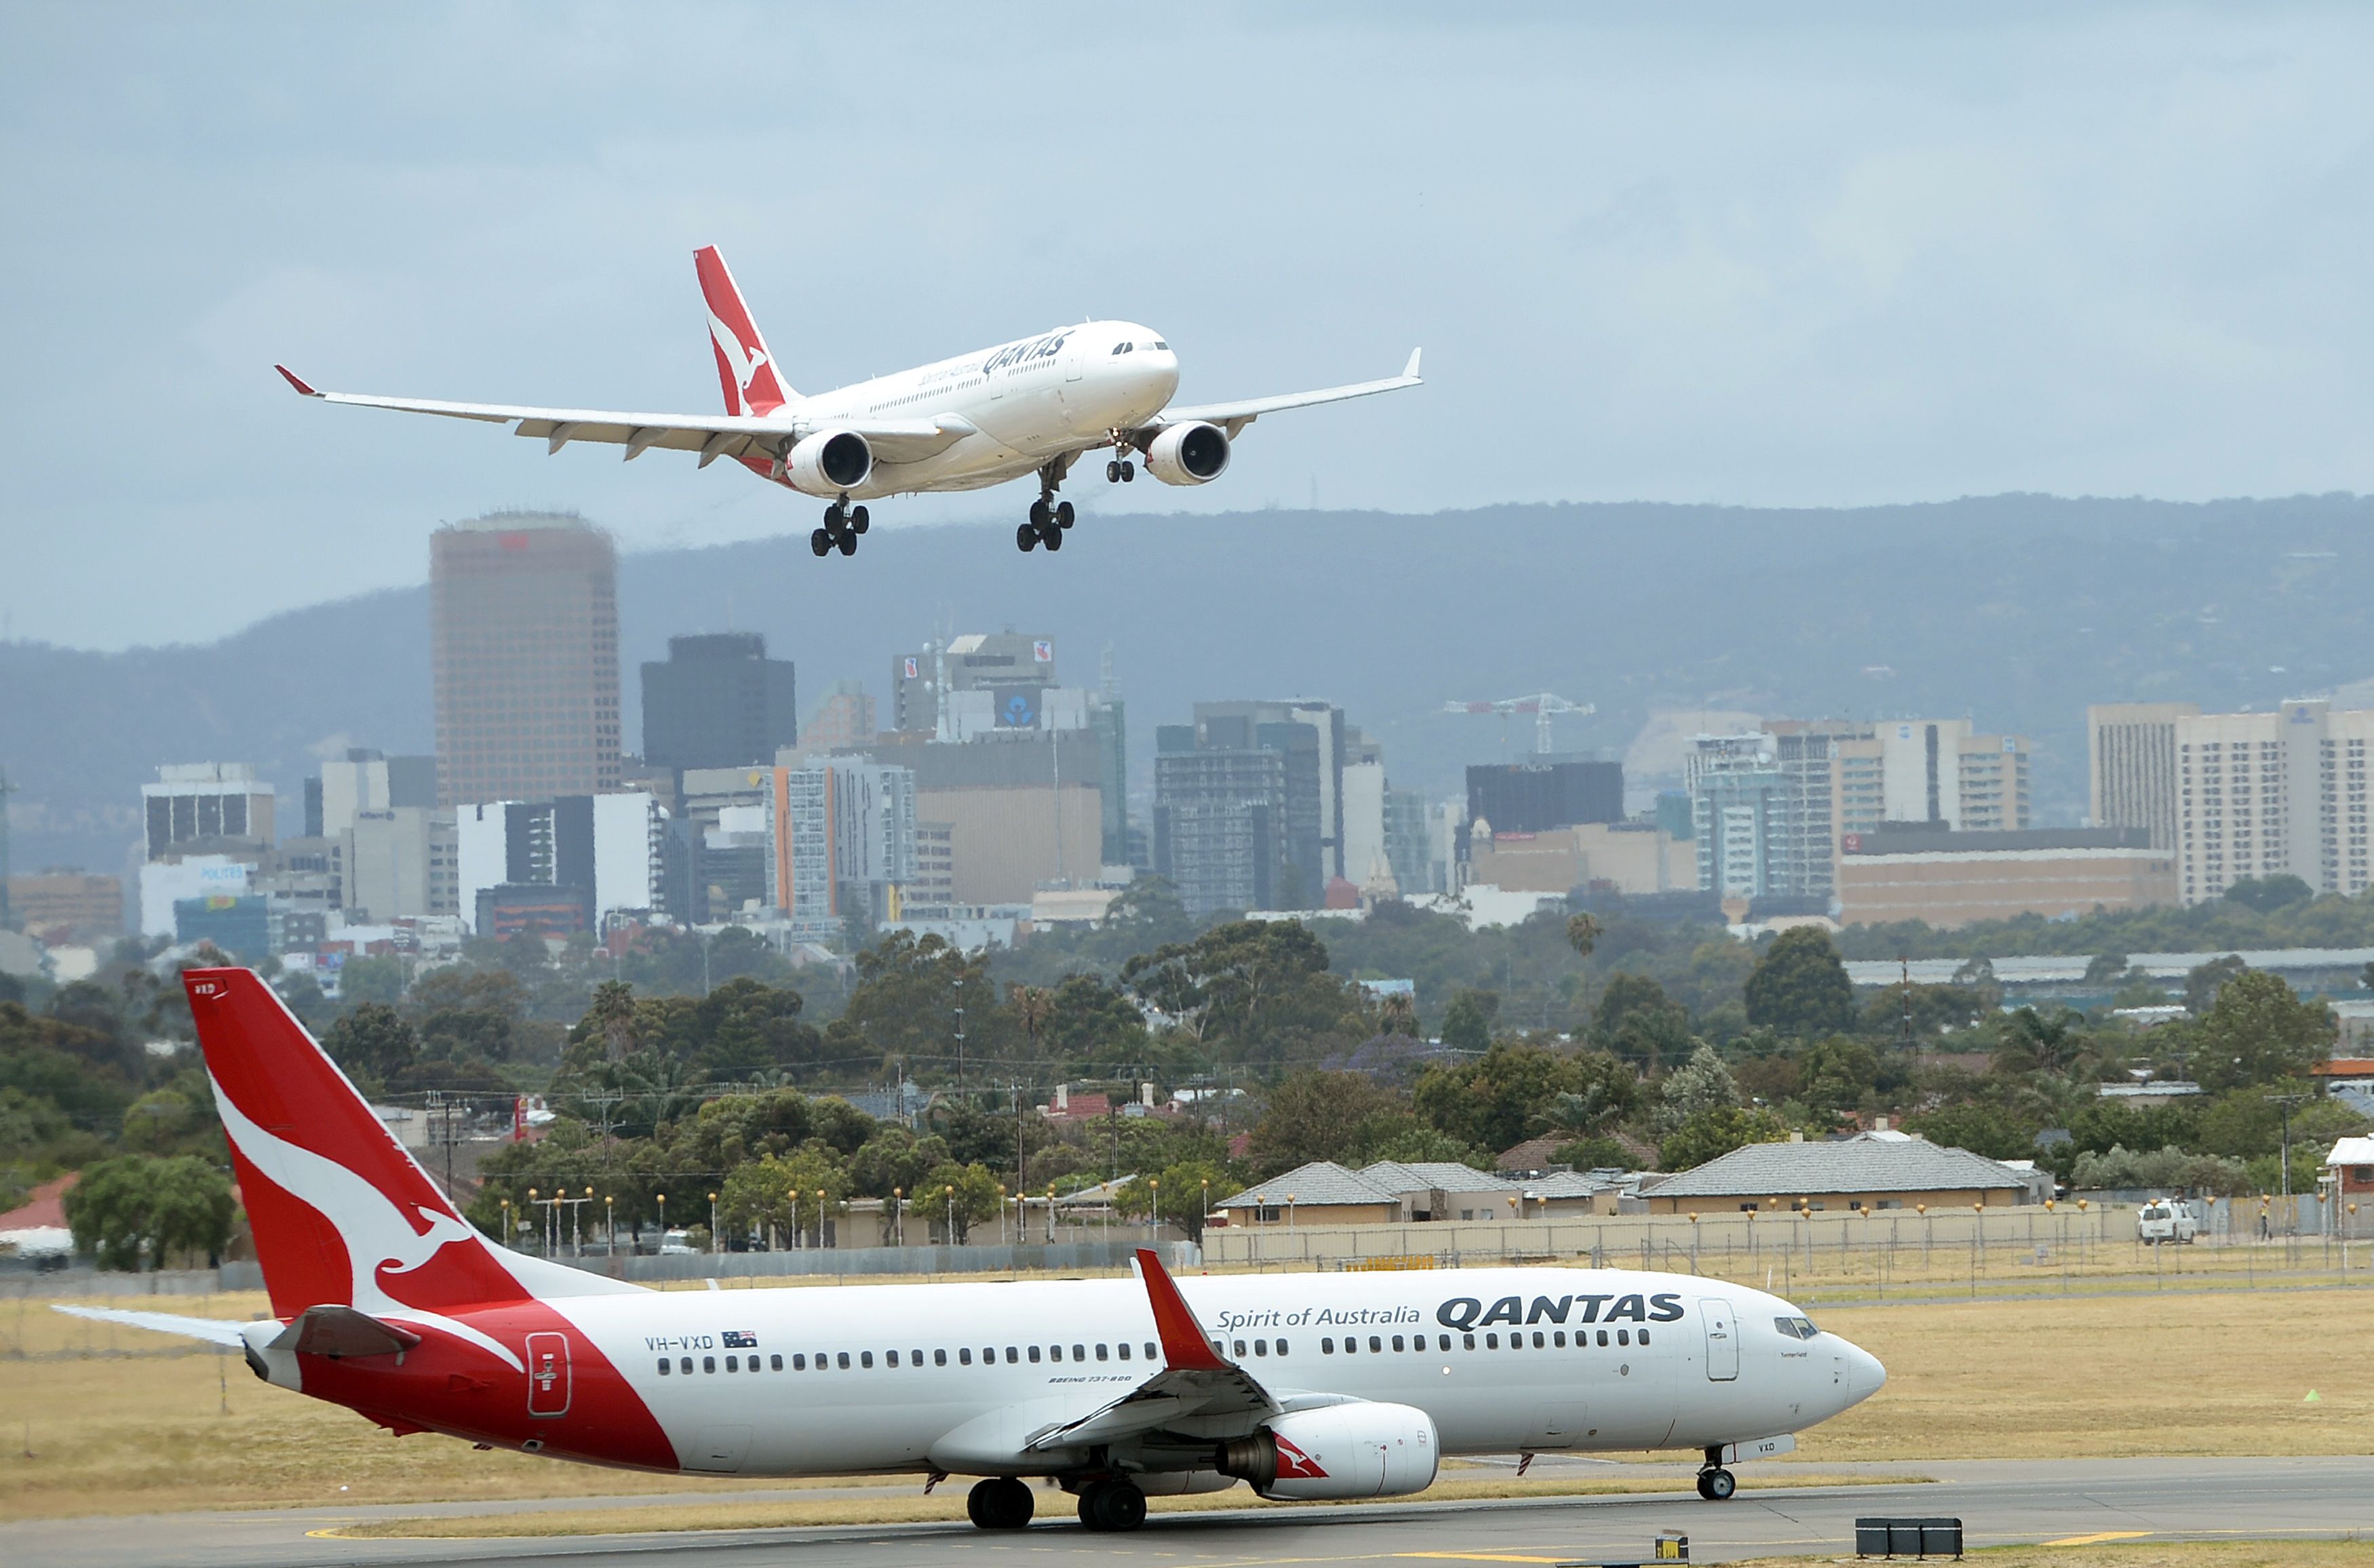 Qantas is about to make more in 6 months than it usually does in a year